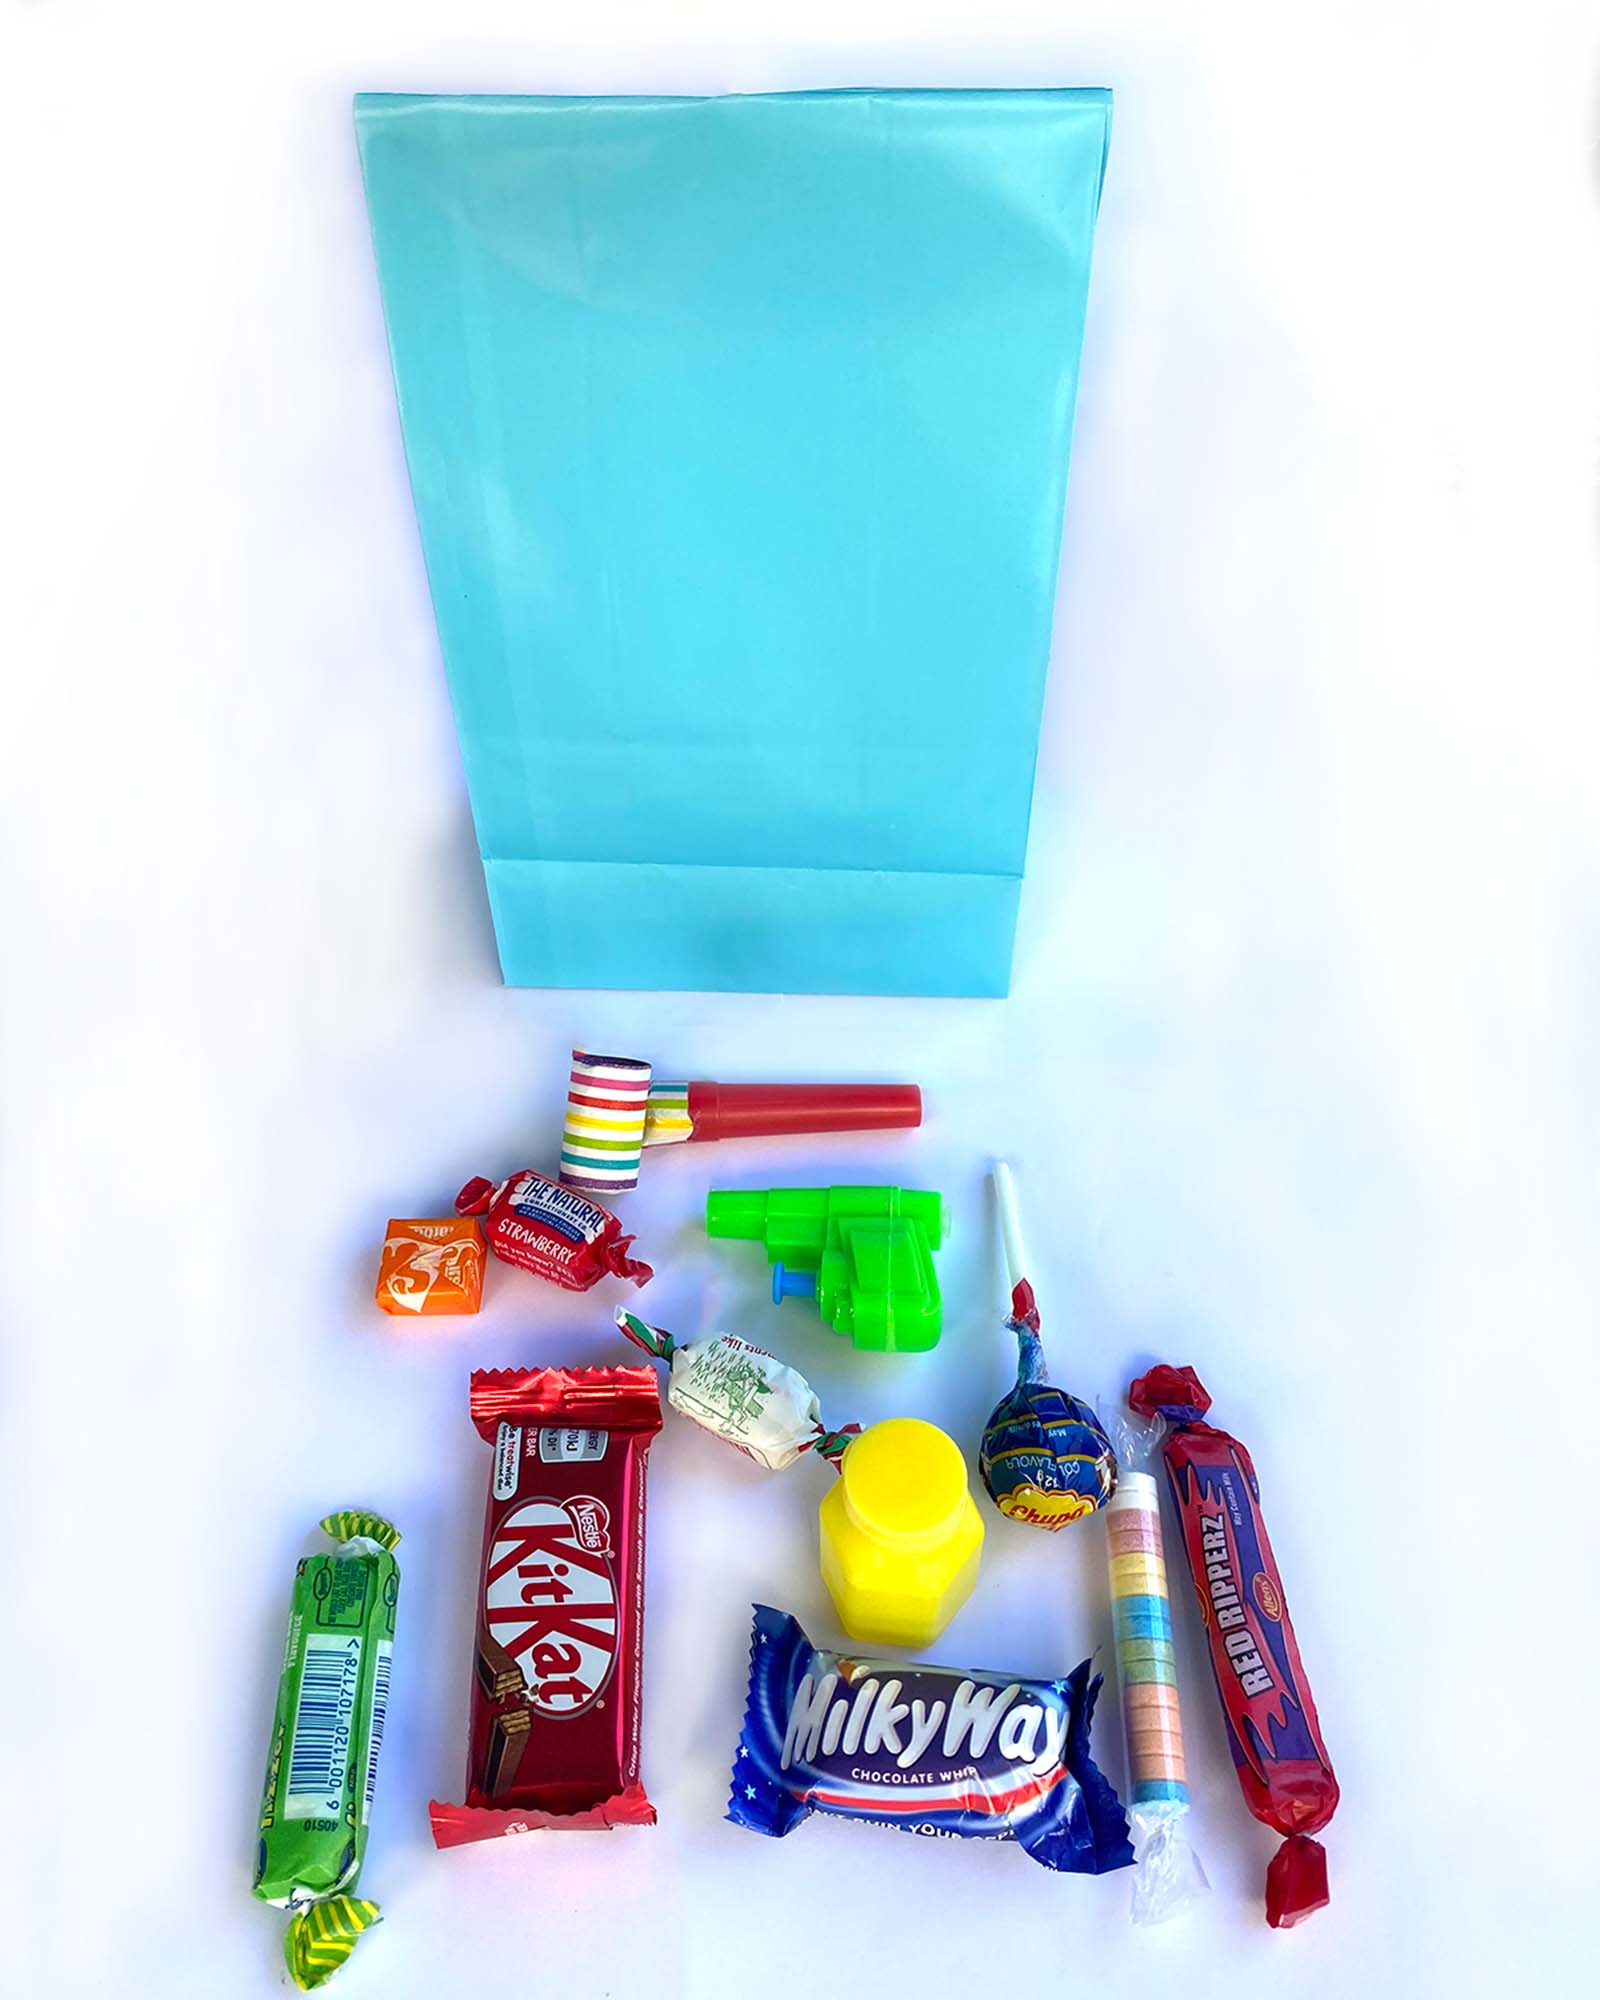 Standard Kids Party Gift Bags